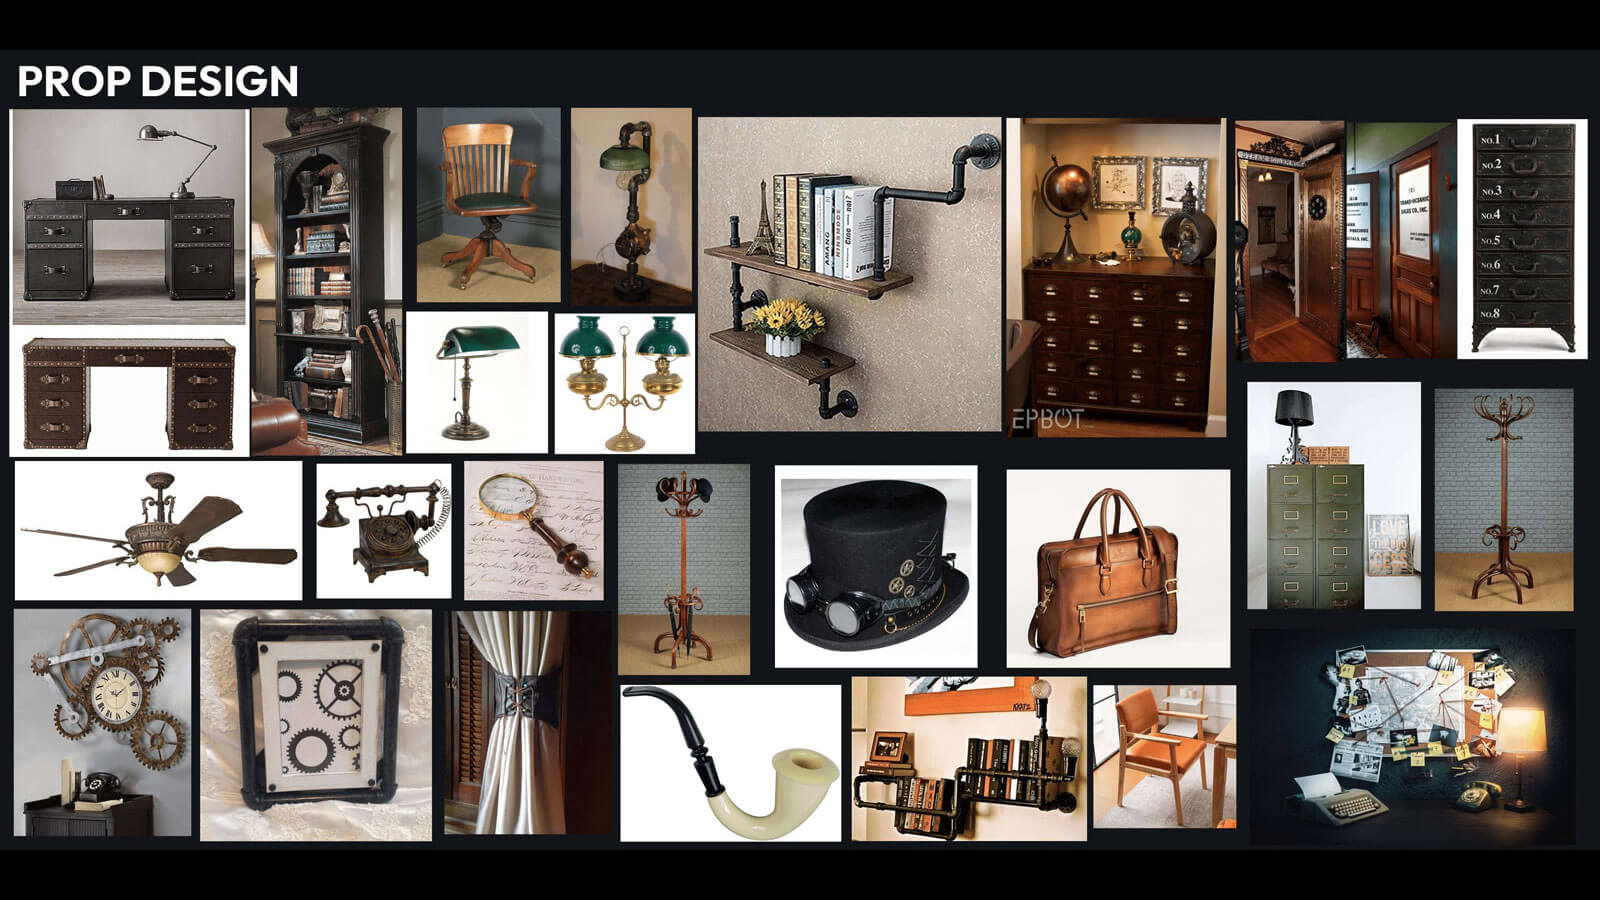 Collage of various contemporary reference images of office furniture and items used for prop design